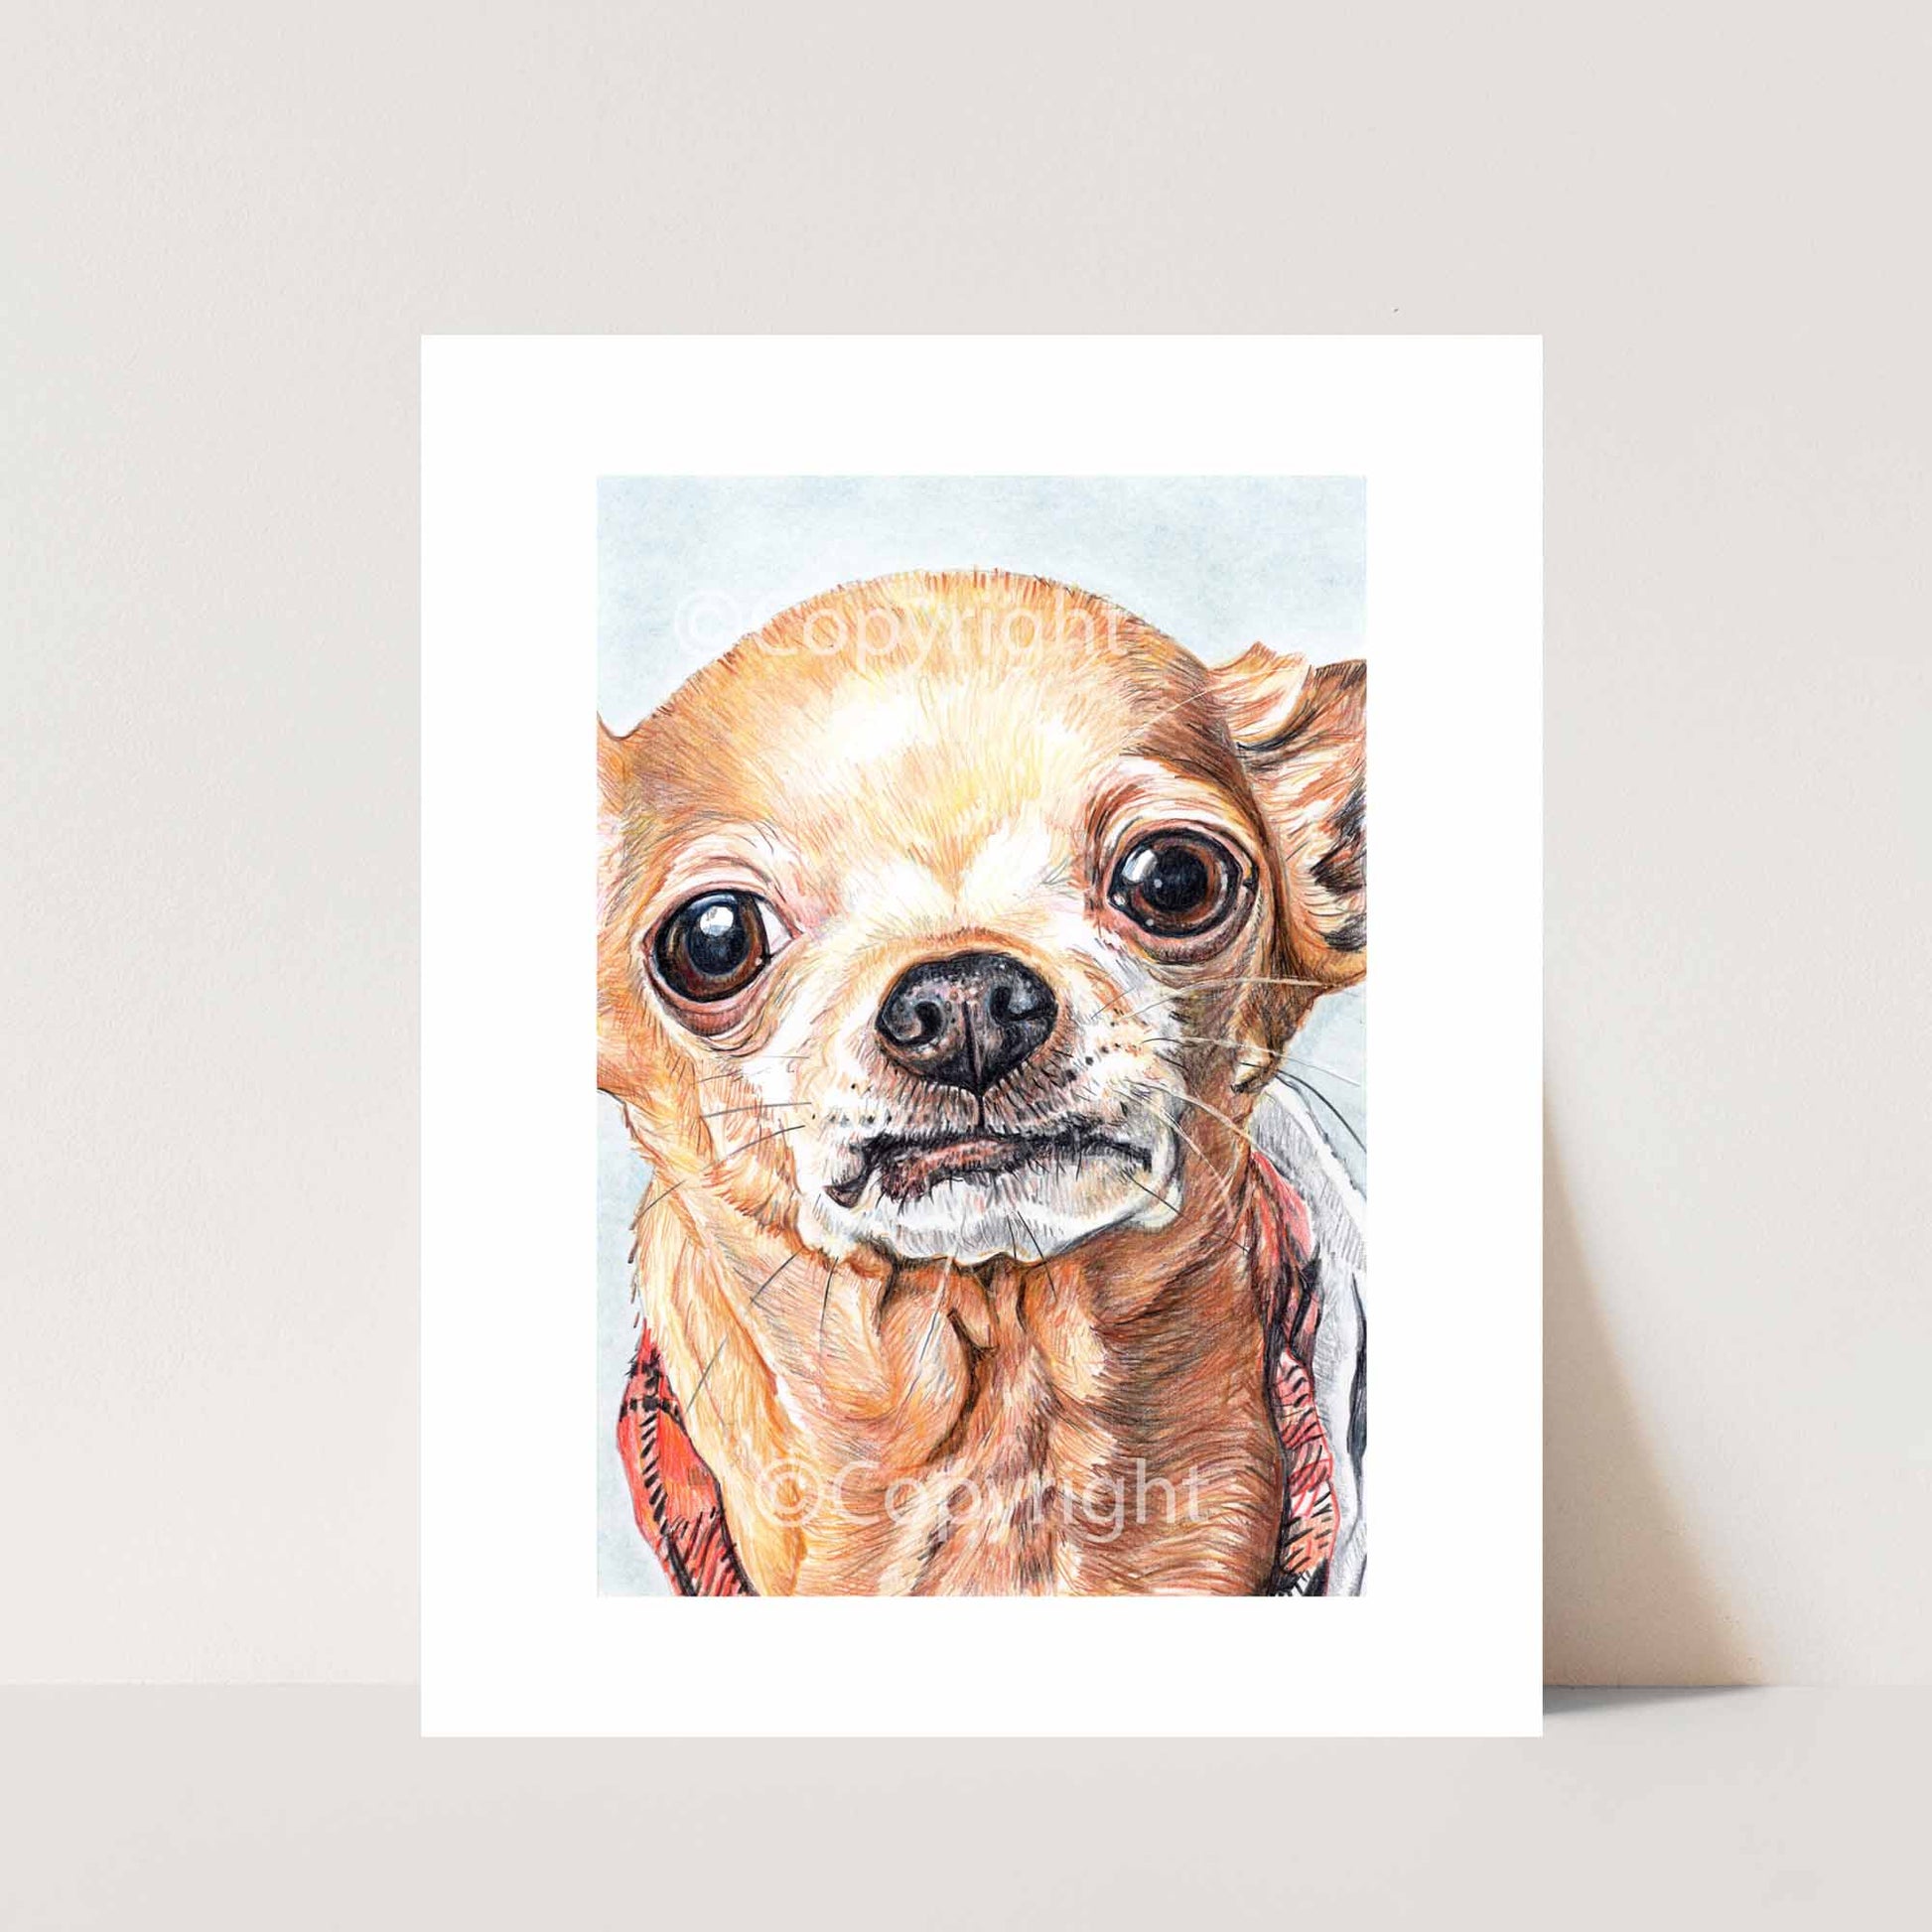 Crayon portrait of a sassy chihuahua dog who is too cook for obedience school. Original art by Deidre Wicks